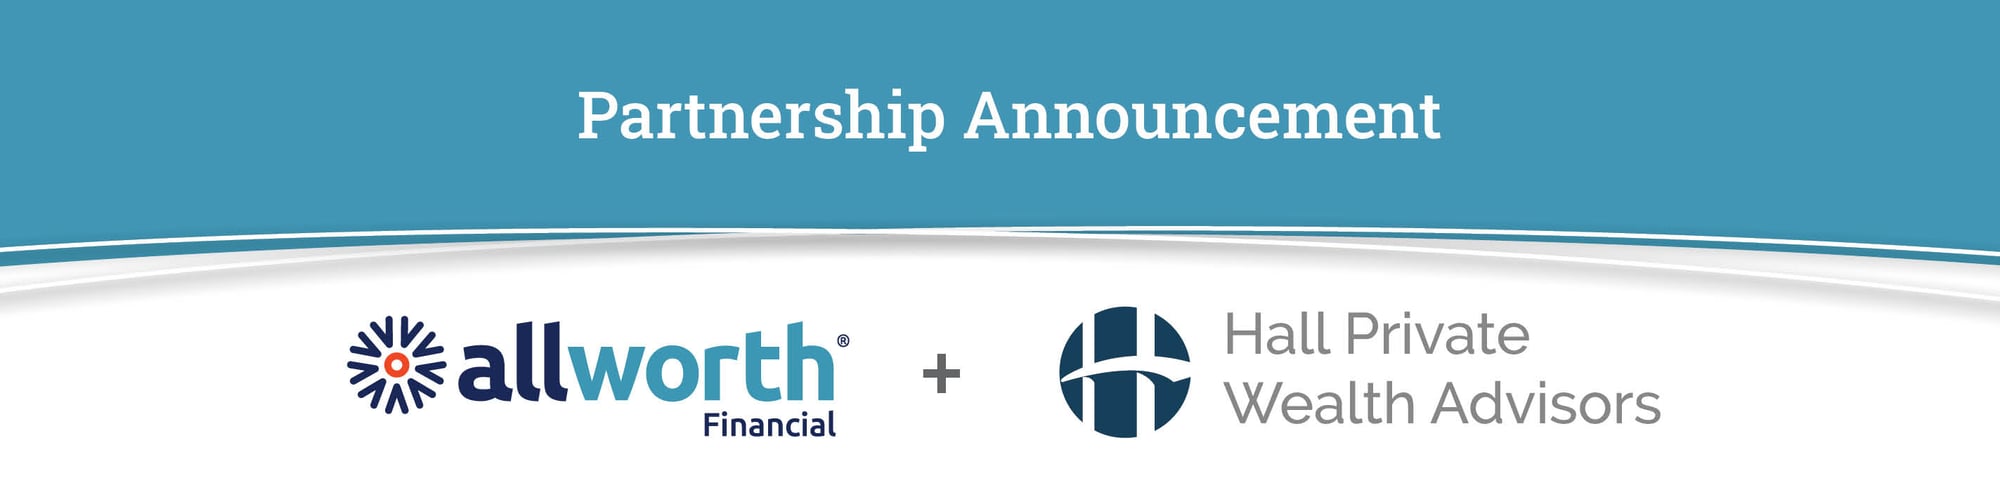 Partnership announcement for Allworth and Hall Private Wealth Advisors, displaying both logos side-by-side